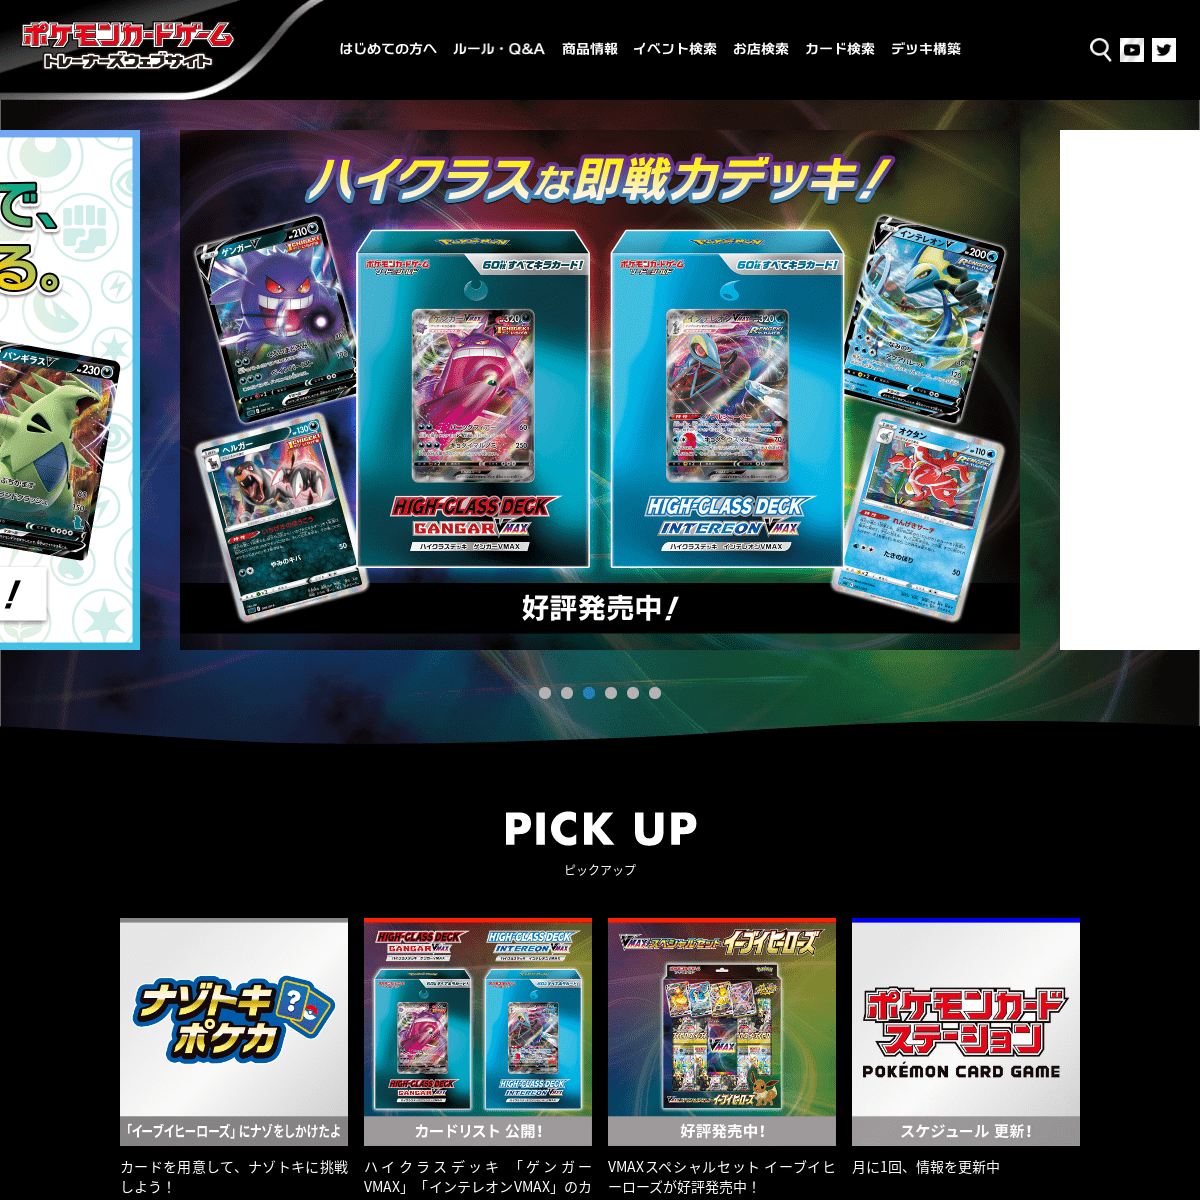 A complete backup of https://pokemon-card.com